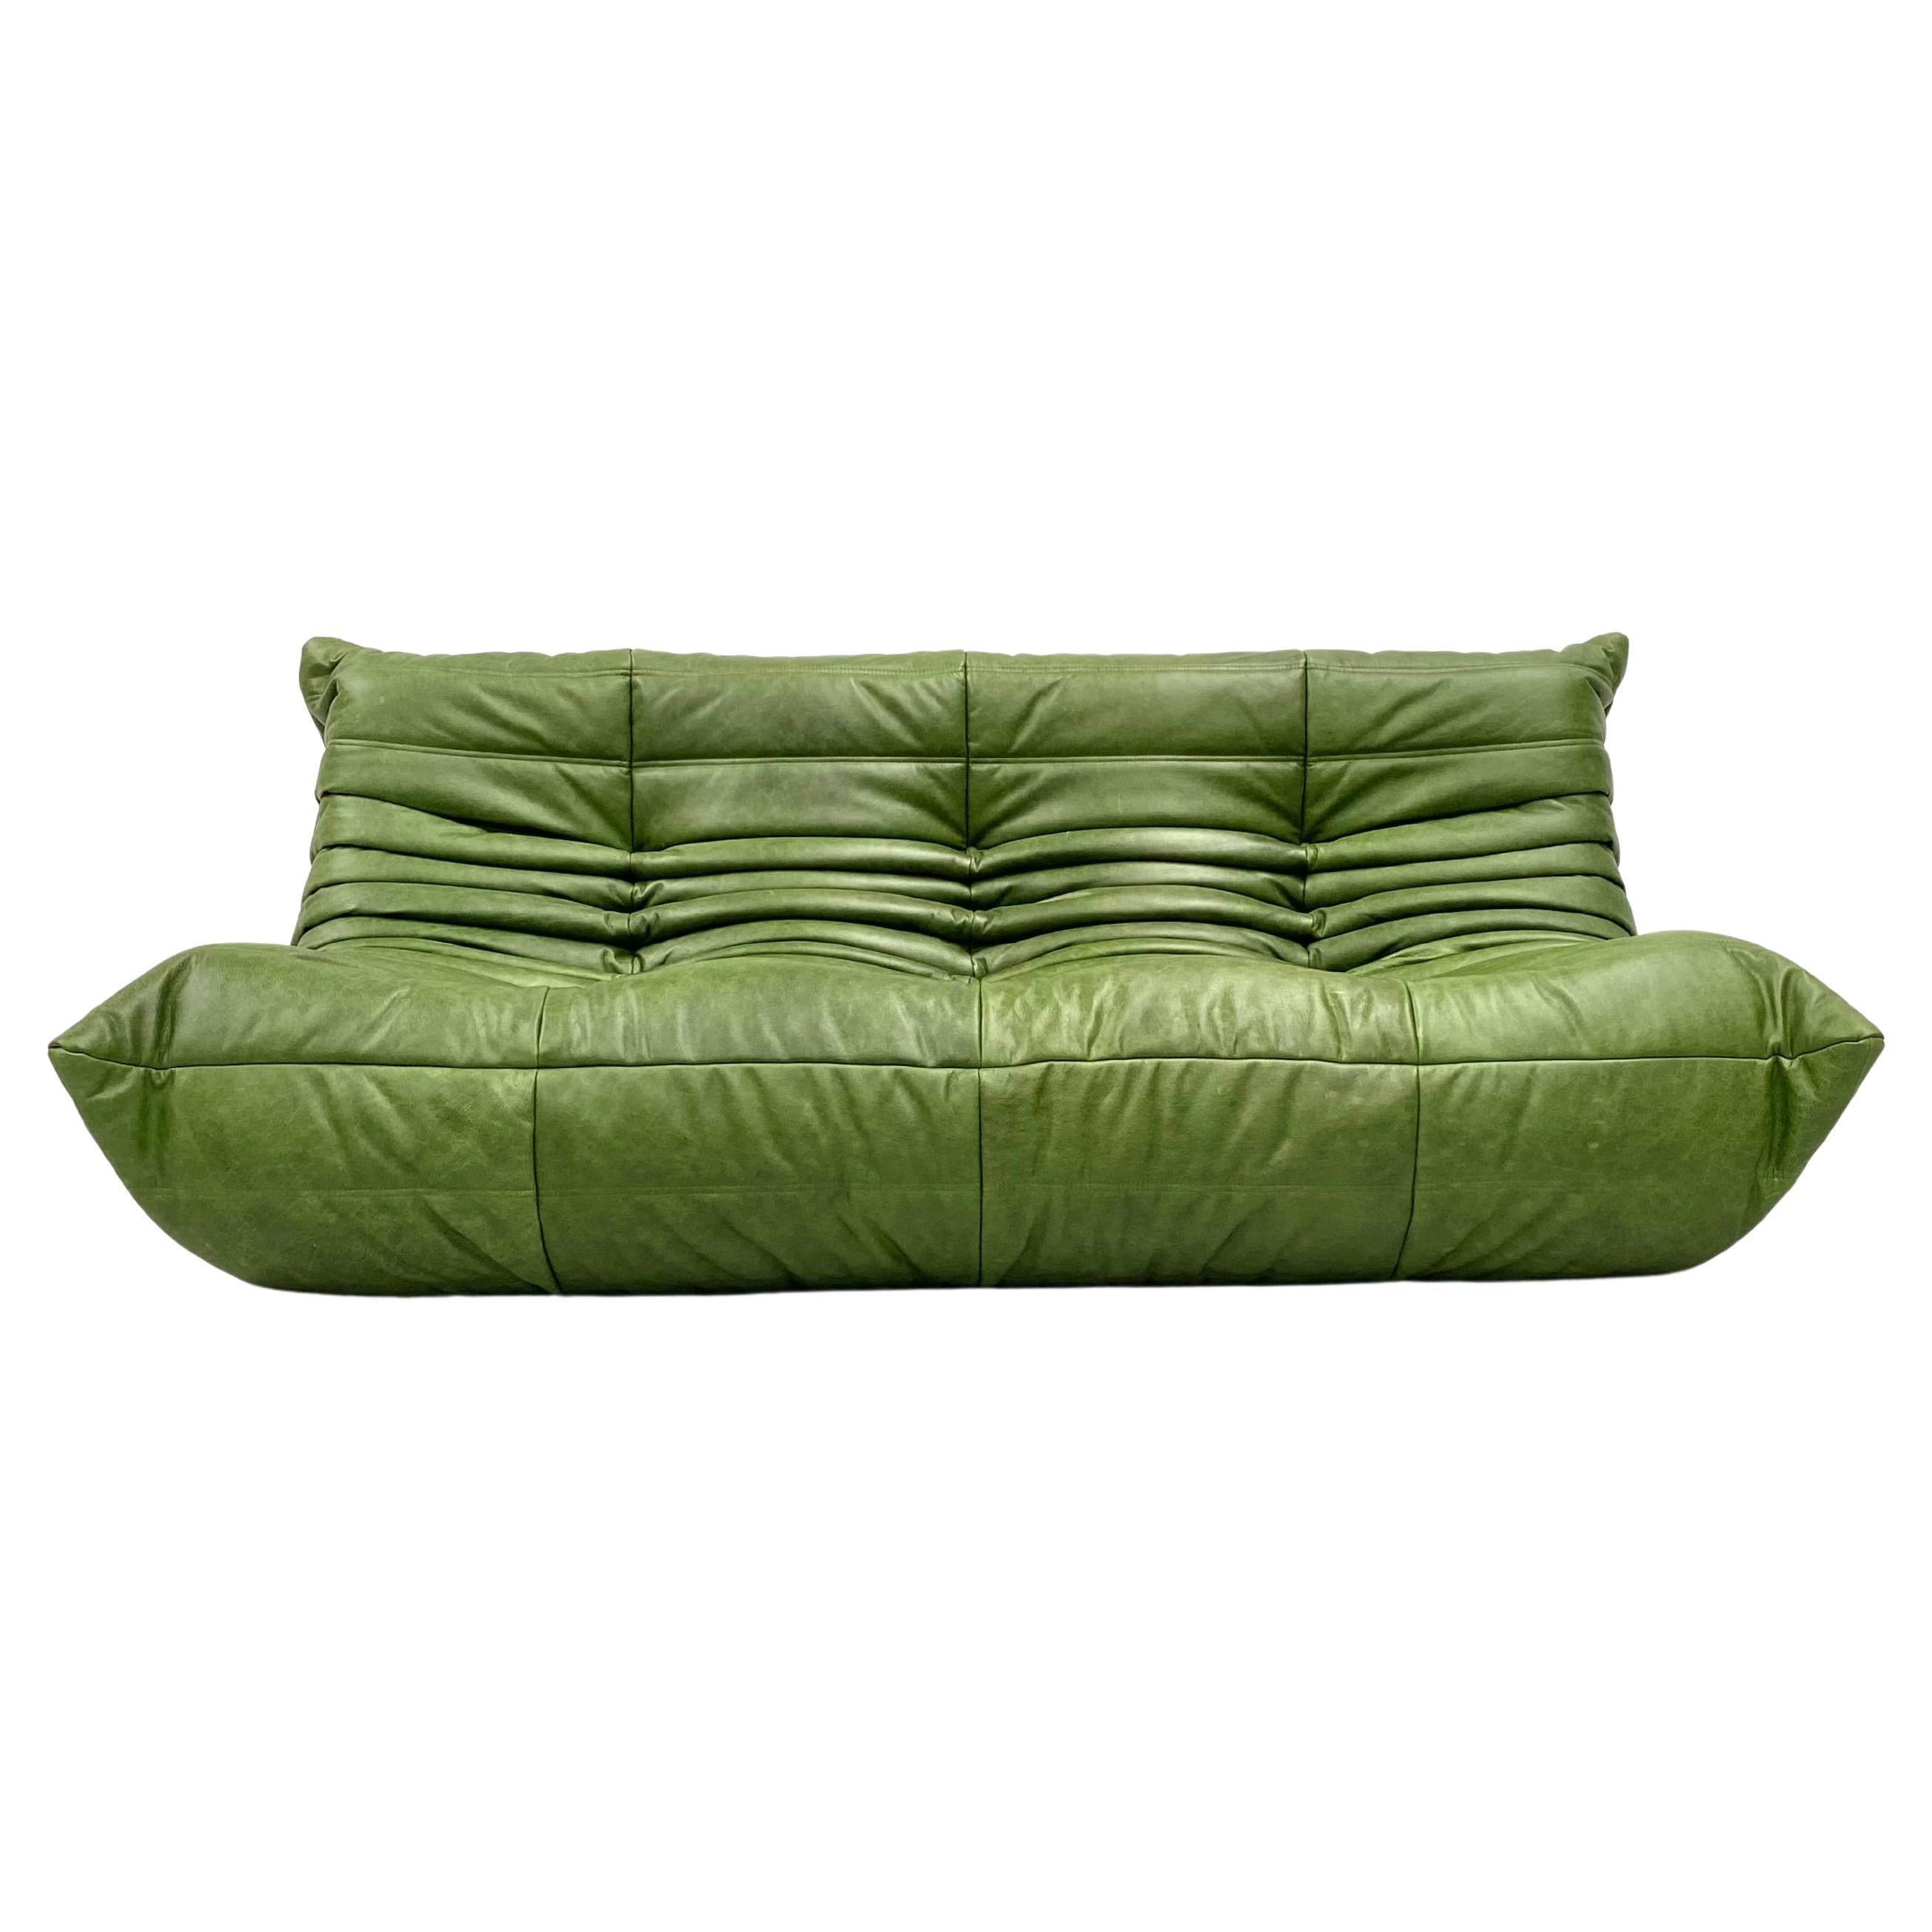 French  Togo Sofa in Green  Leather by Michel Ducaroy for Ligne Roset. For Sale